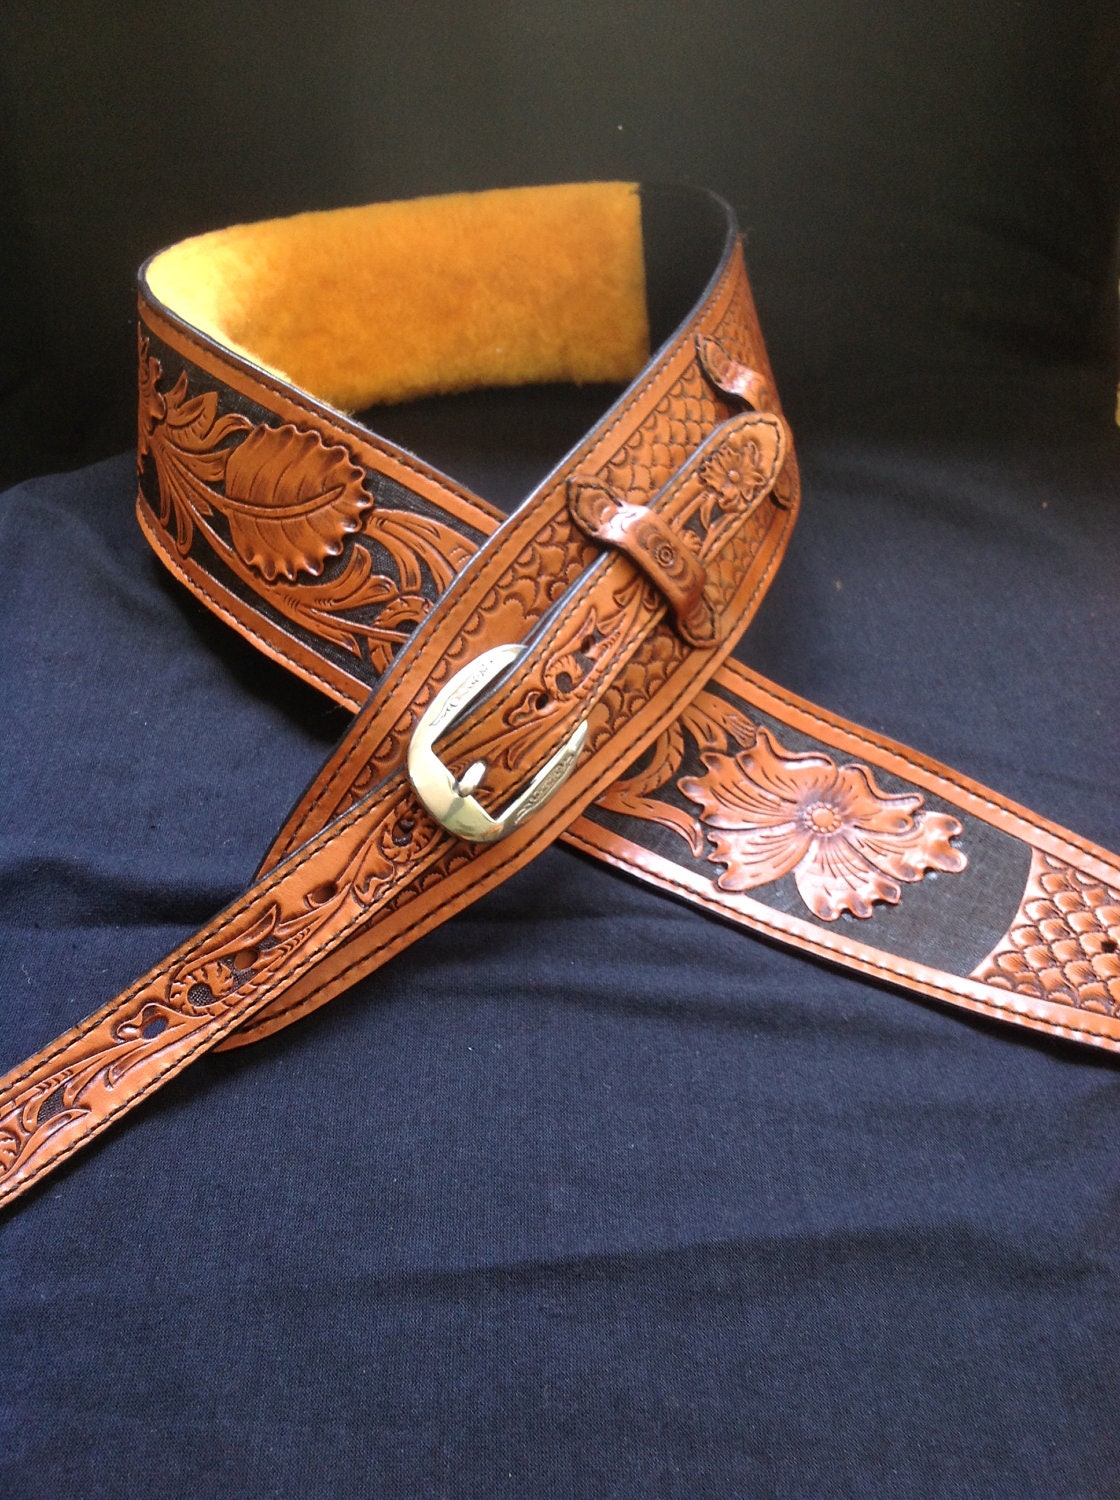 Tooled leather guitar strap